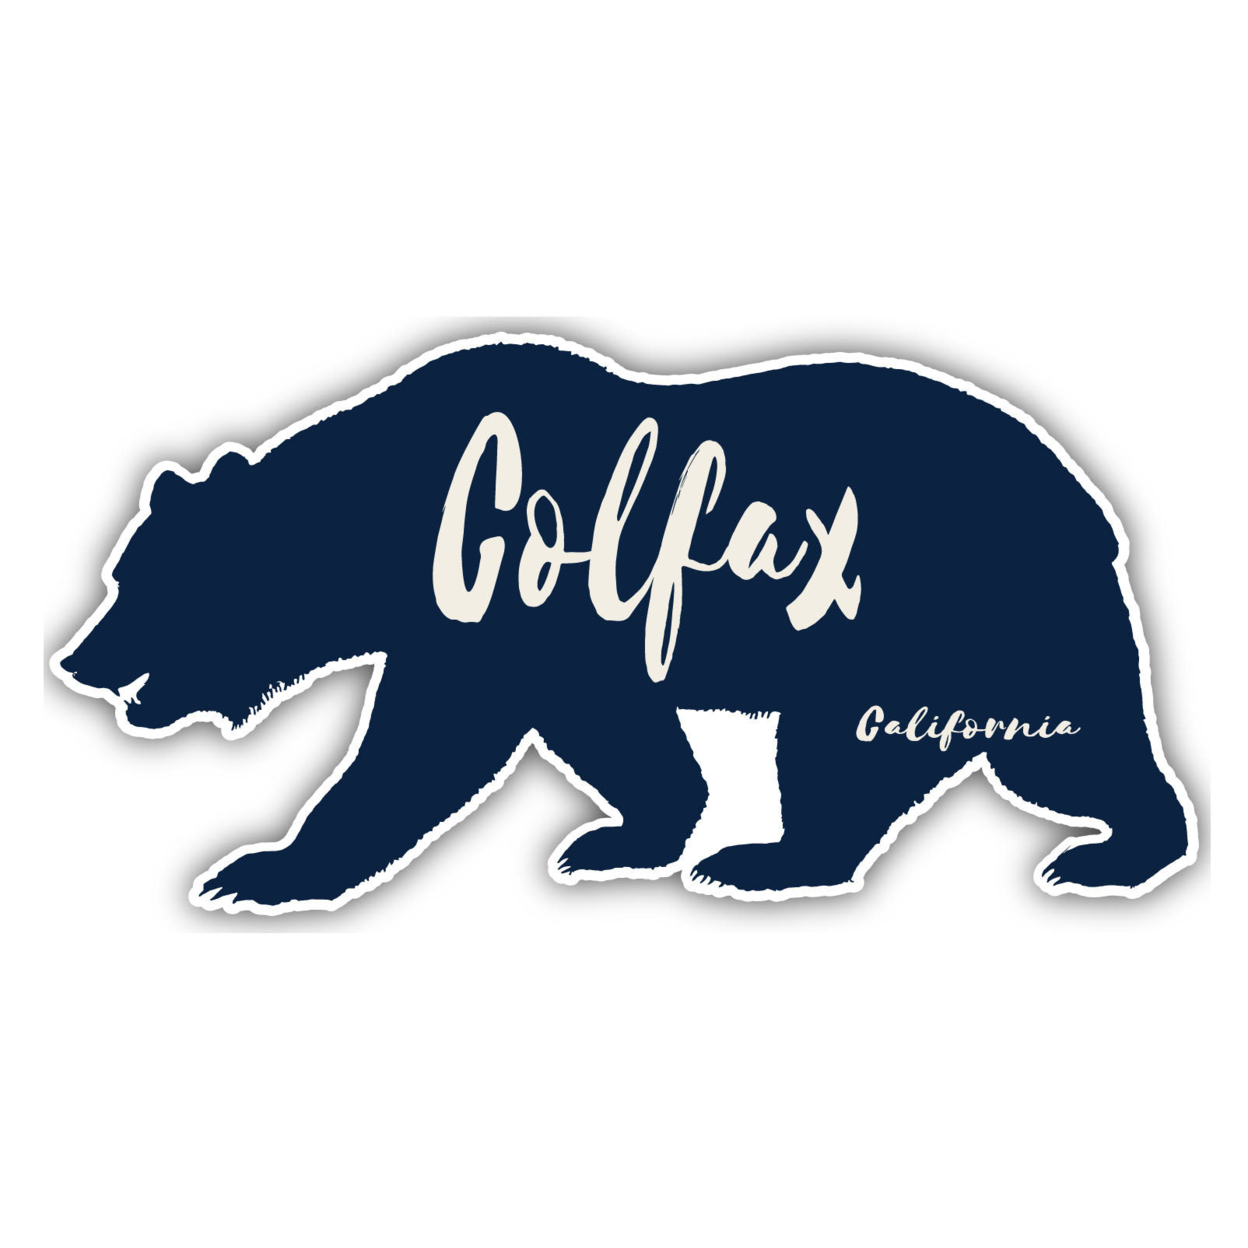 Colfax California Souvenir Decorative Stickers (Choose Theme And Size) - 4-Pack, 10-Inch, Bear